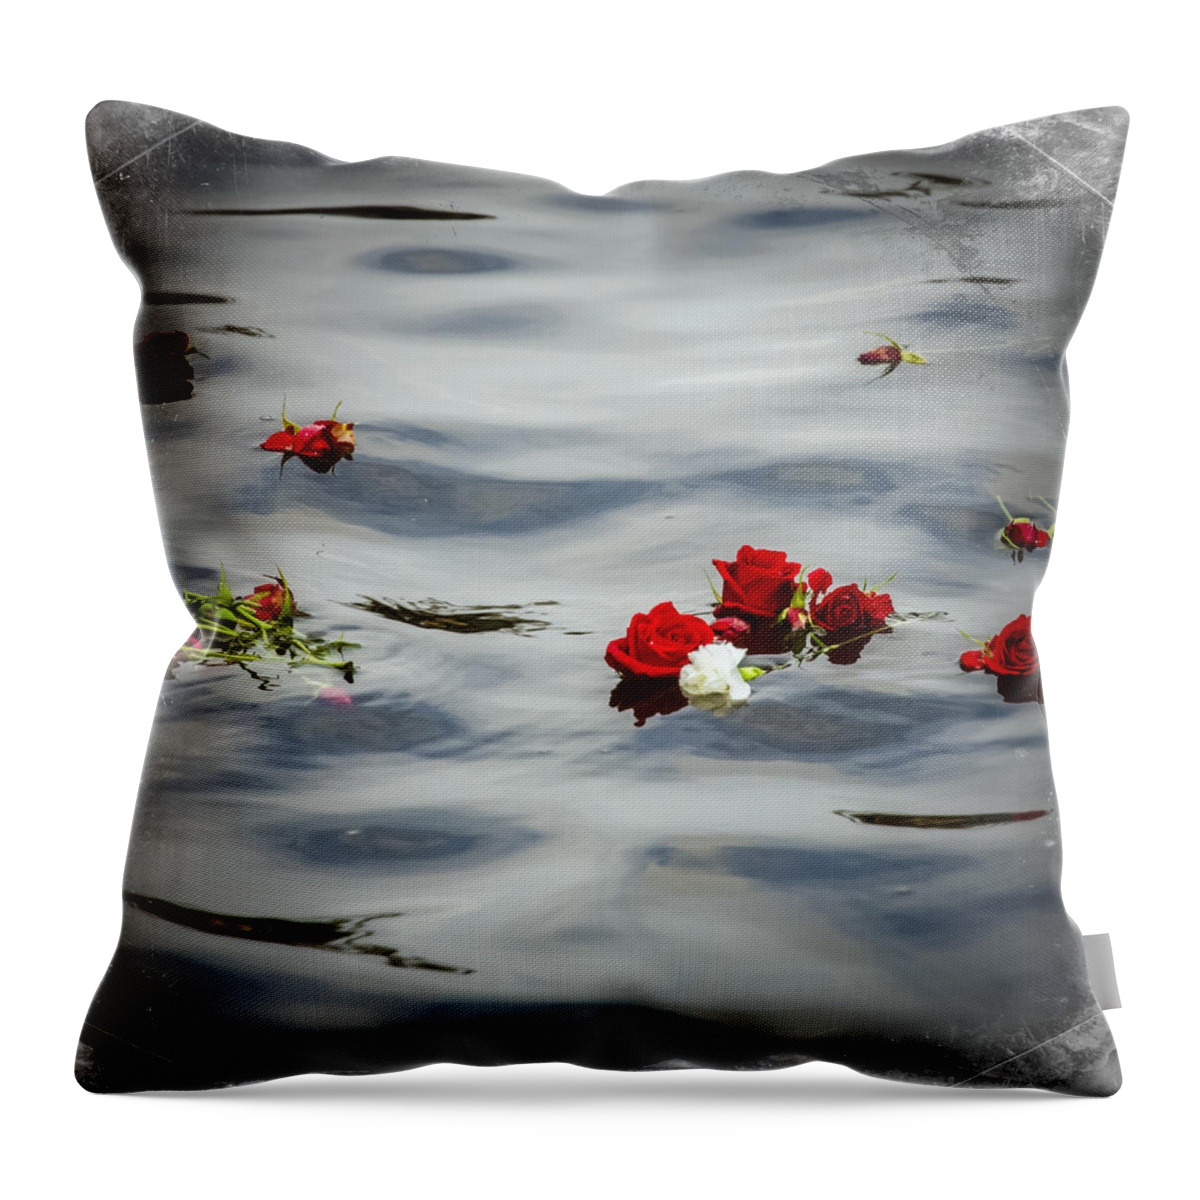 Memorial Throw Pillow featuring the photograph Remember by Carolyn Marshall